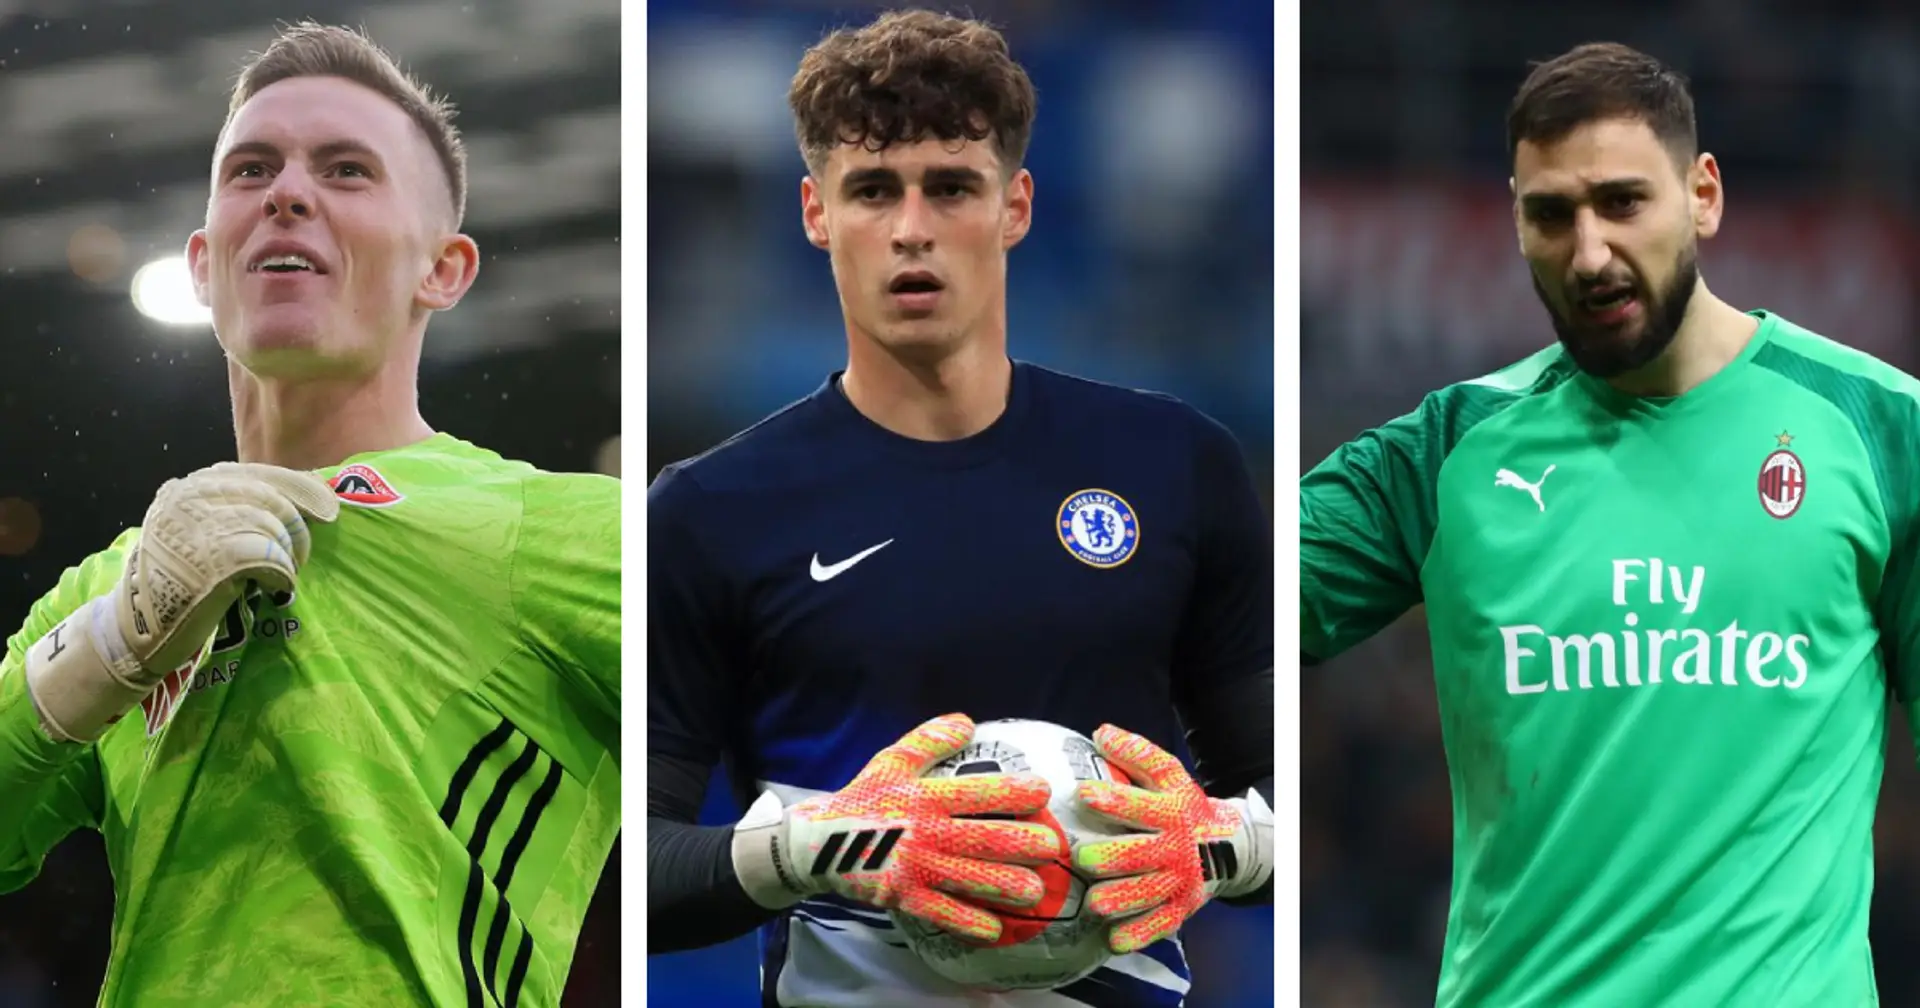 6 Kepa alternatives for Chelsea to consider that won't cost an arm and a leg like Jan Oblak 